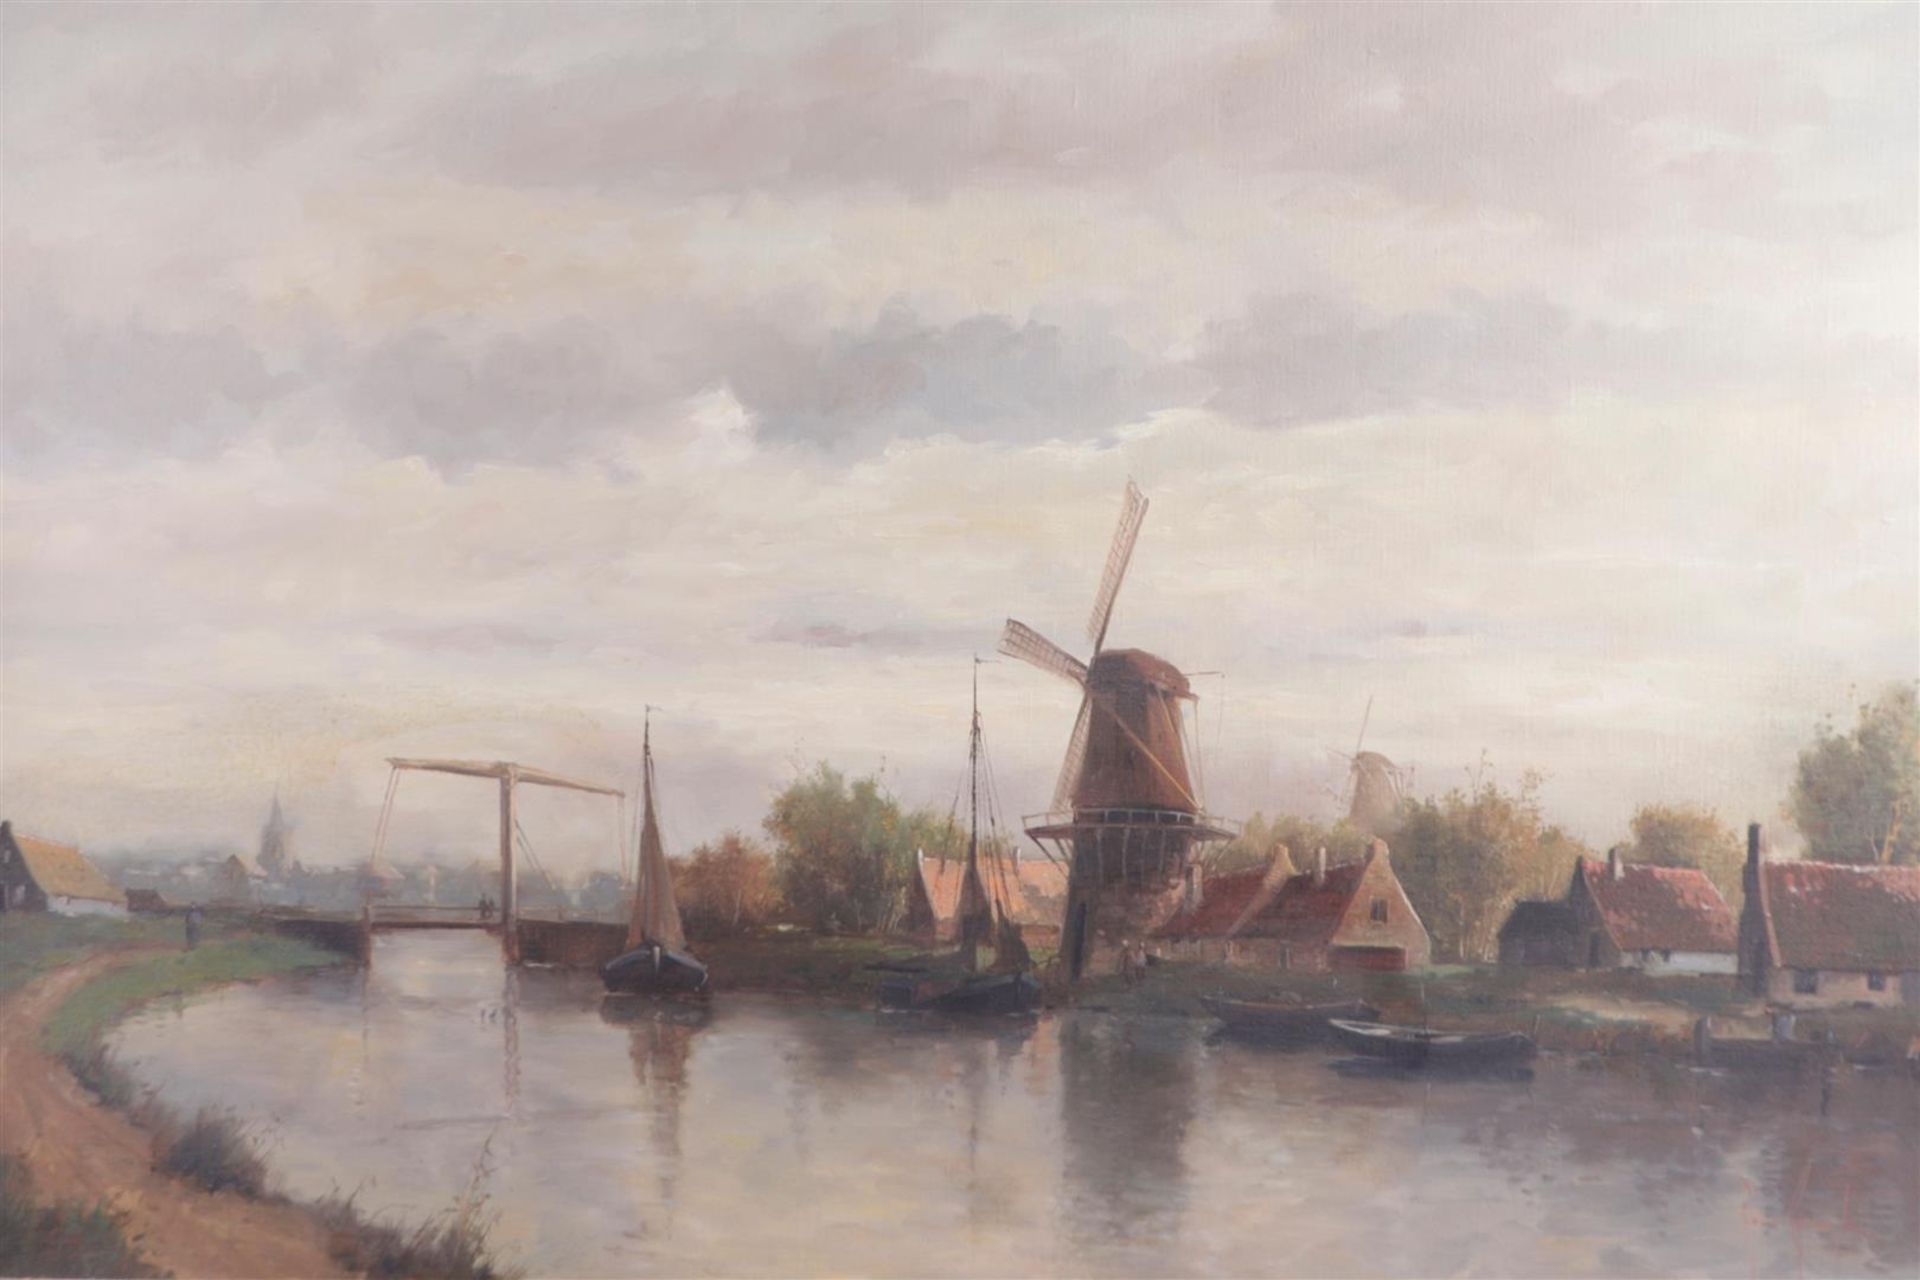 Jan van Rijswijk, early 20th century, Mill on a river, signed (bottom right), oil on canvas,
60 x 90